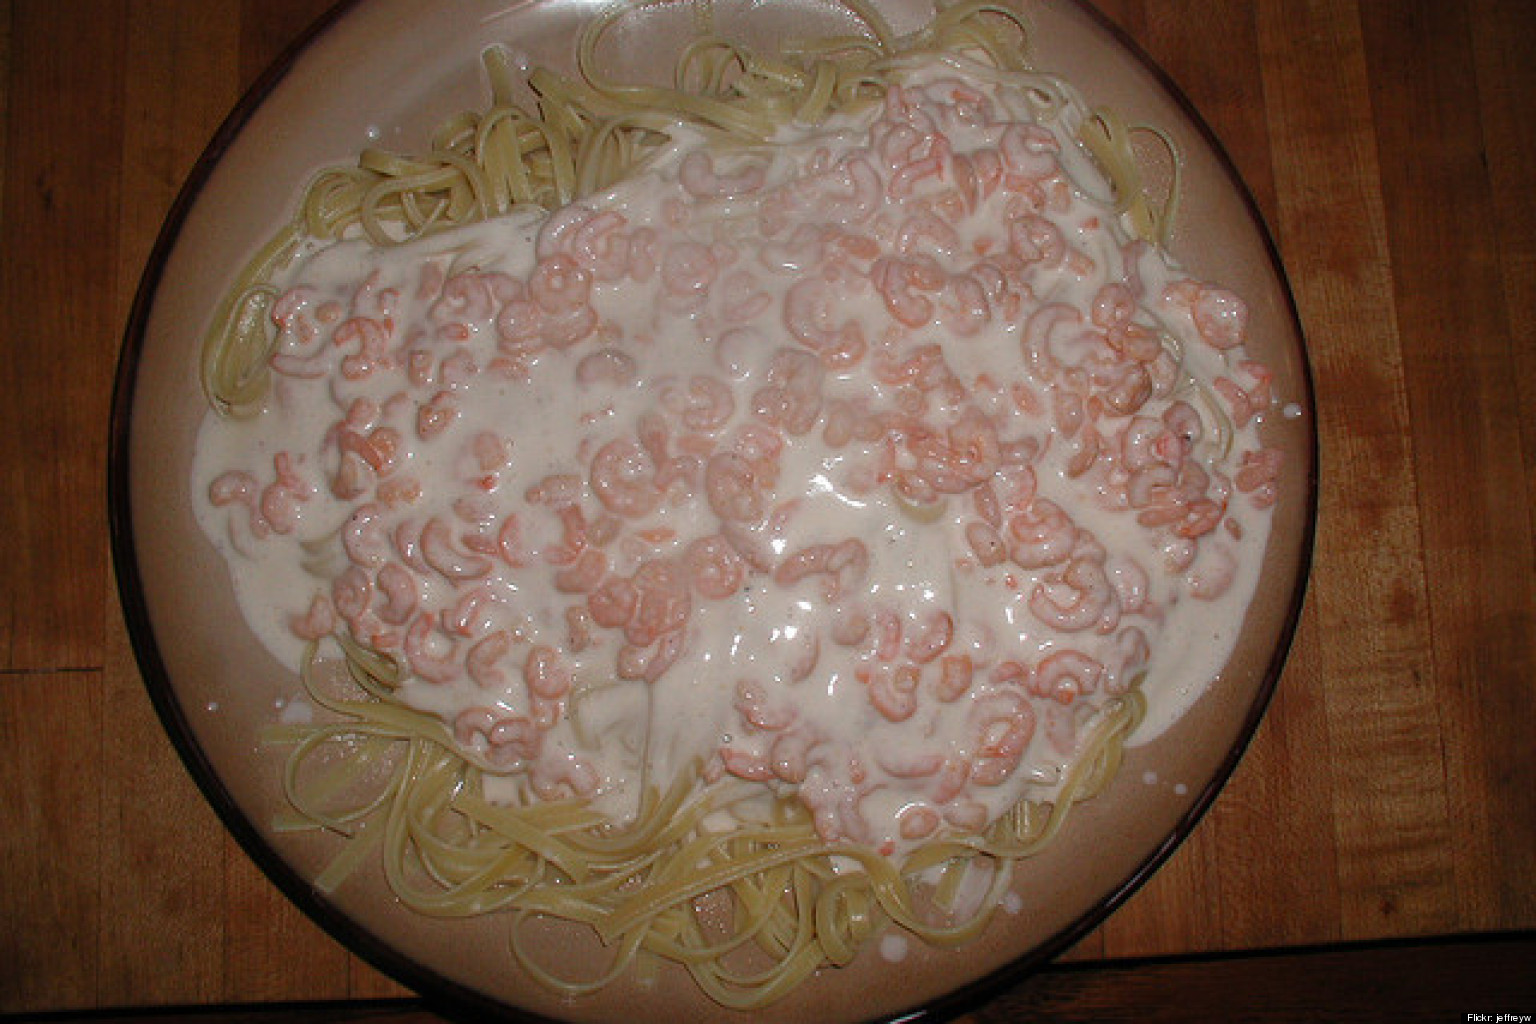 Pasta Fails: The Internet's Most Spectacular Disappointments (PHOTOS) | HuffPost1536 x 1024